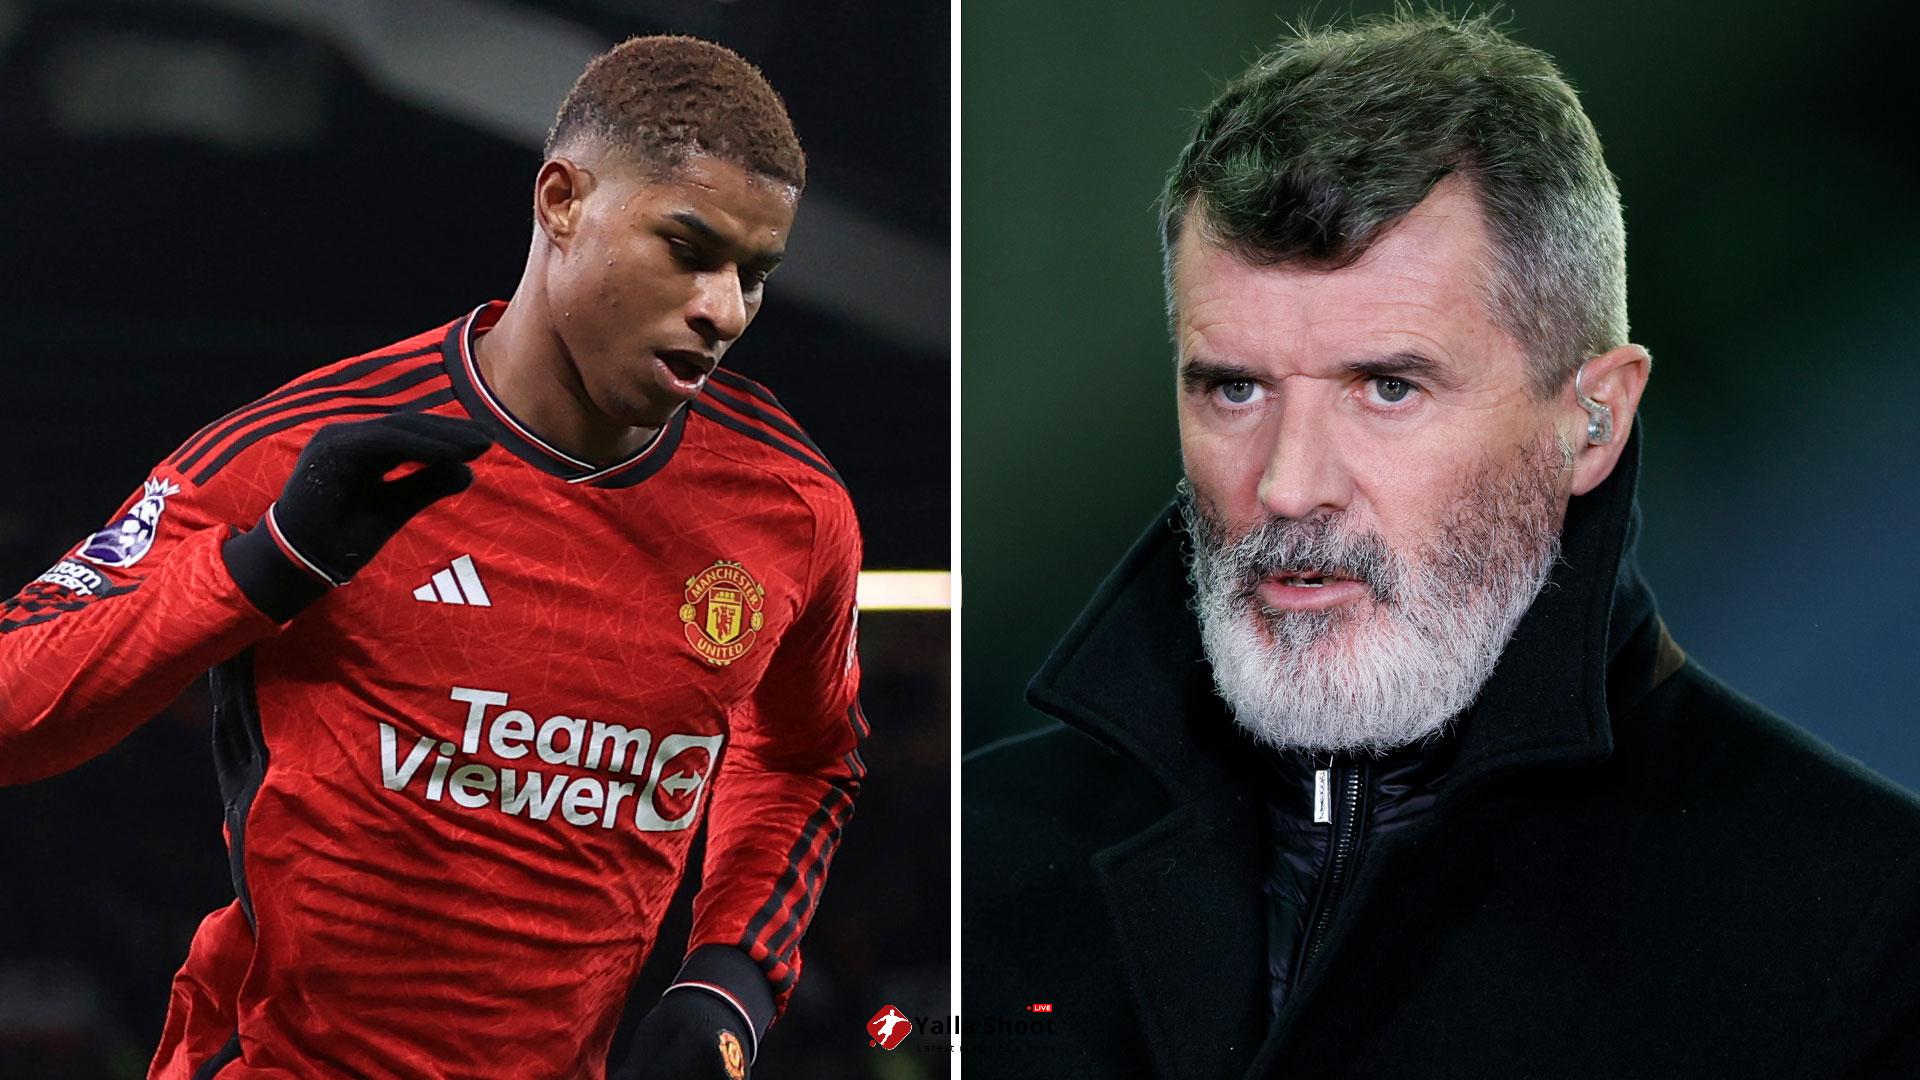 Roy Keane not impressed with Marcus Rashford's celebration as Man Utd star told ‘you have no right to be upset’